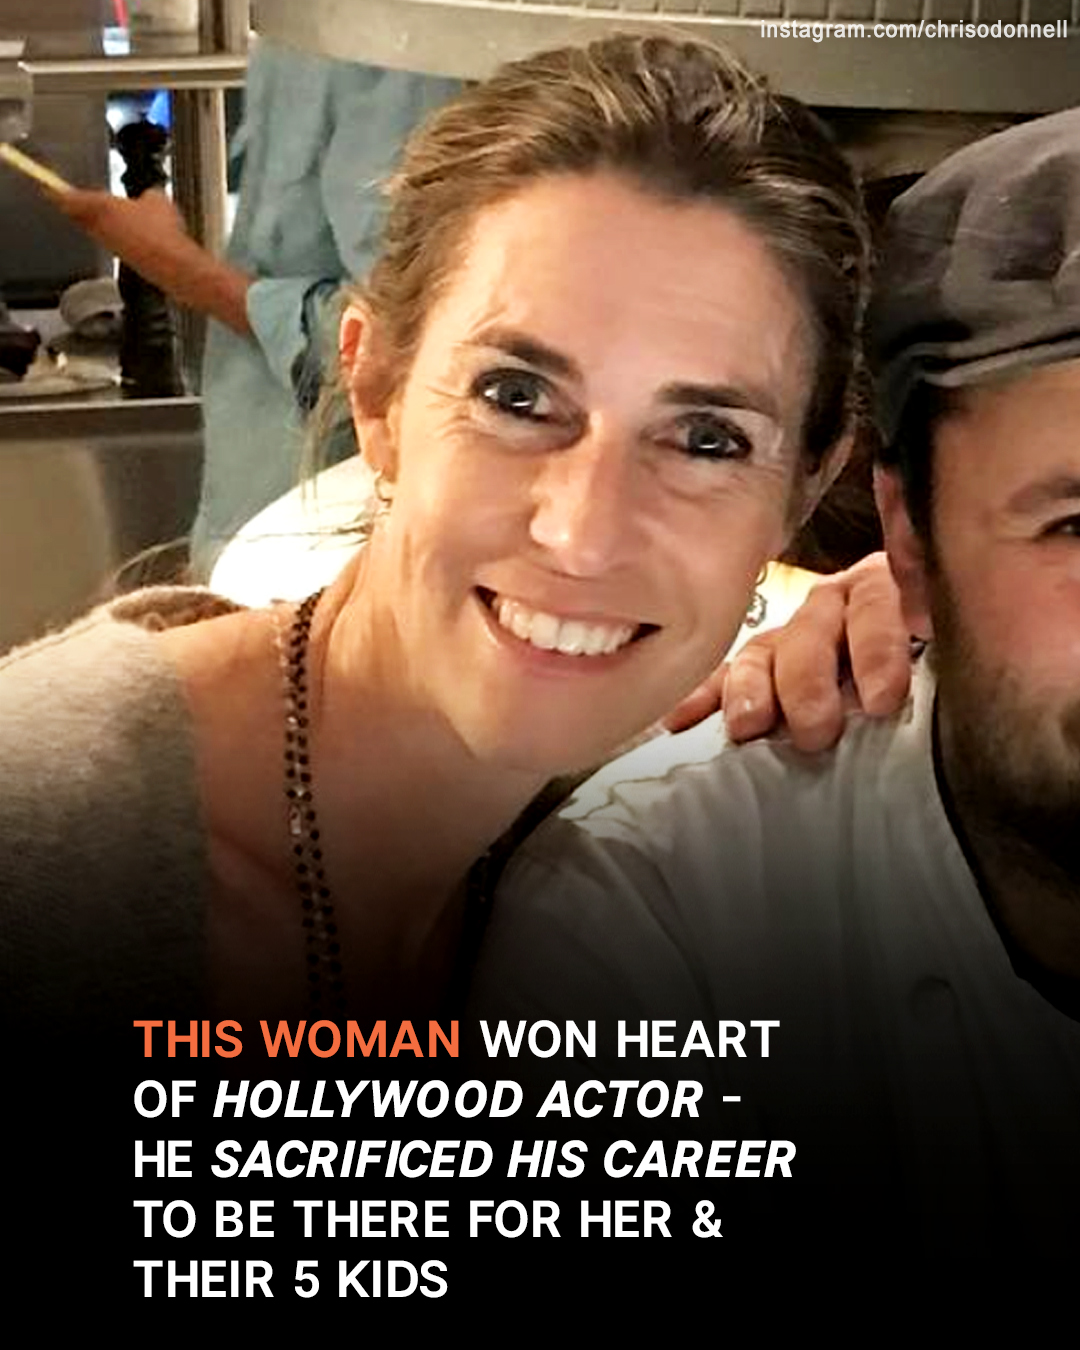 This Woman Won the Heart of a Hollywood Actor – He Sacrificed His Career to Be There for Her & Their 5 Kids